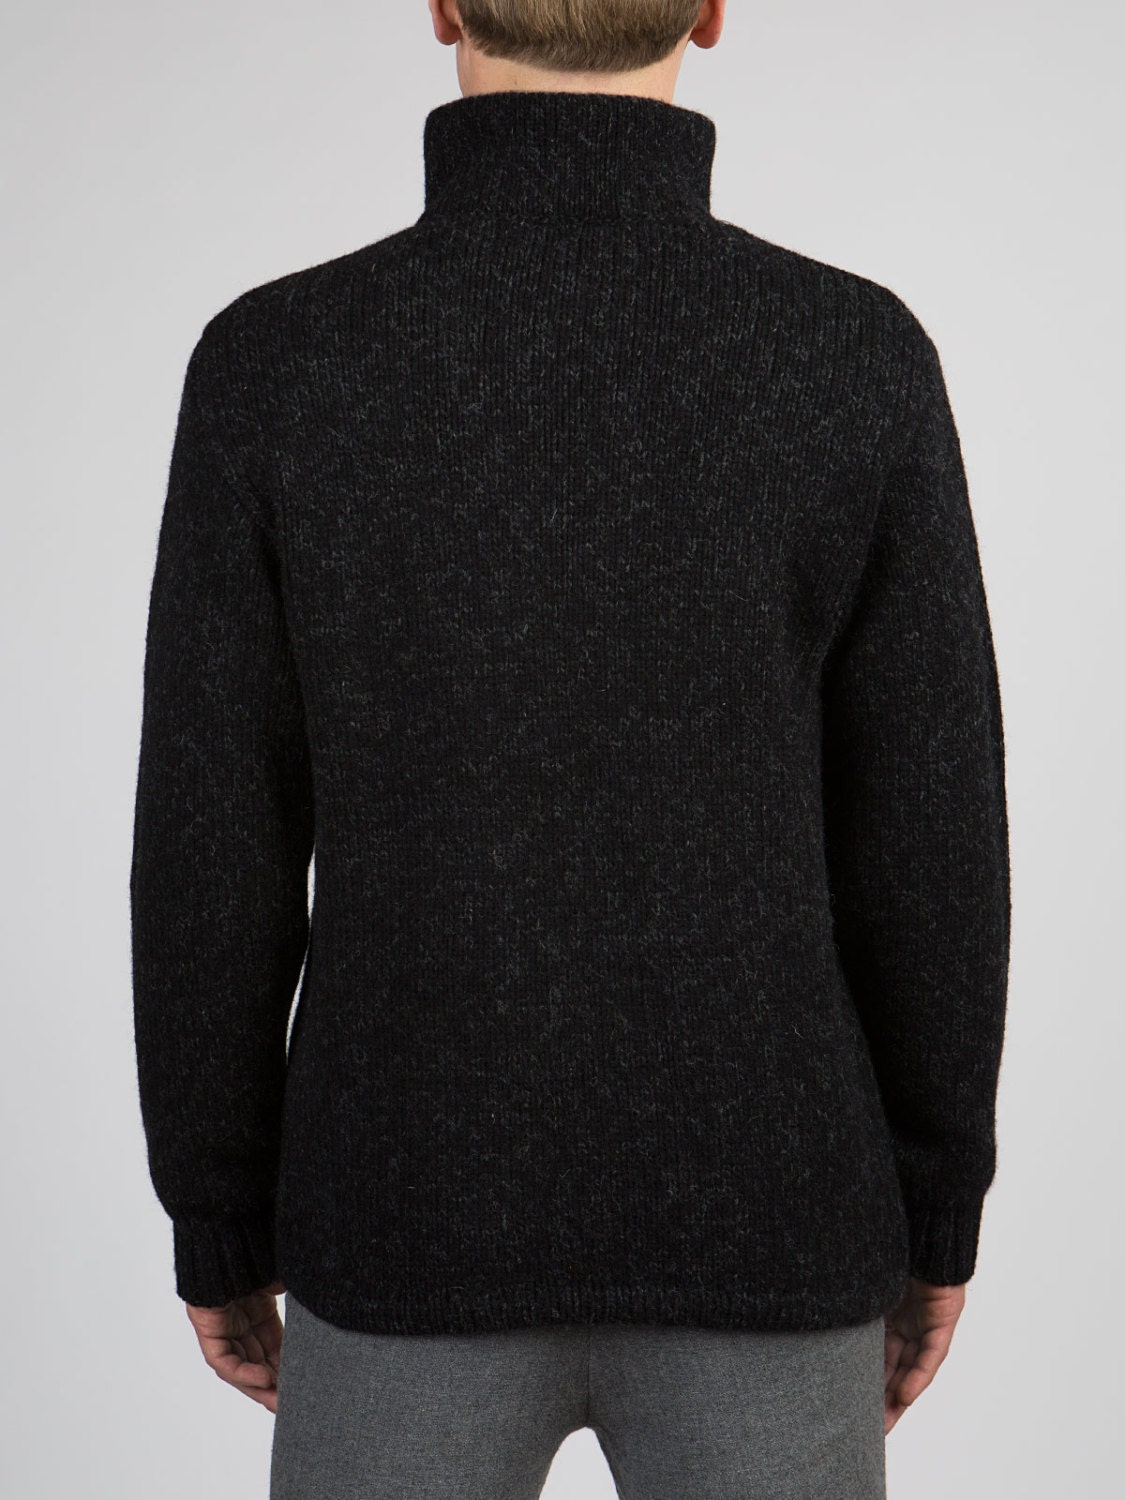 Men's Black Woolen Sweater With High Collar and in Plain - Etsy